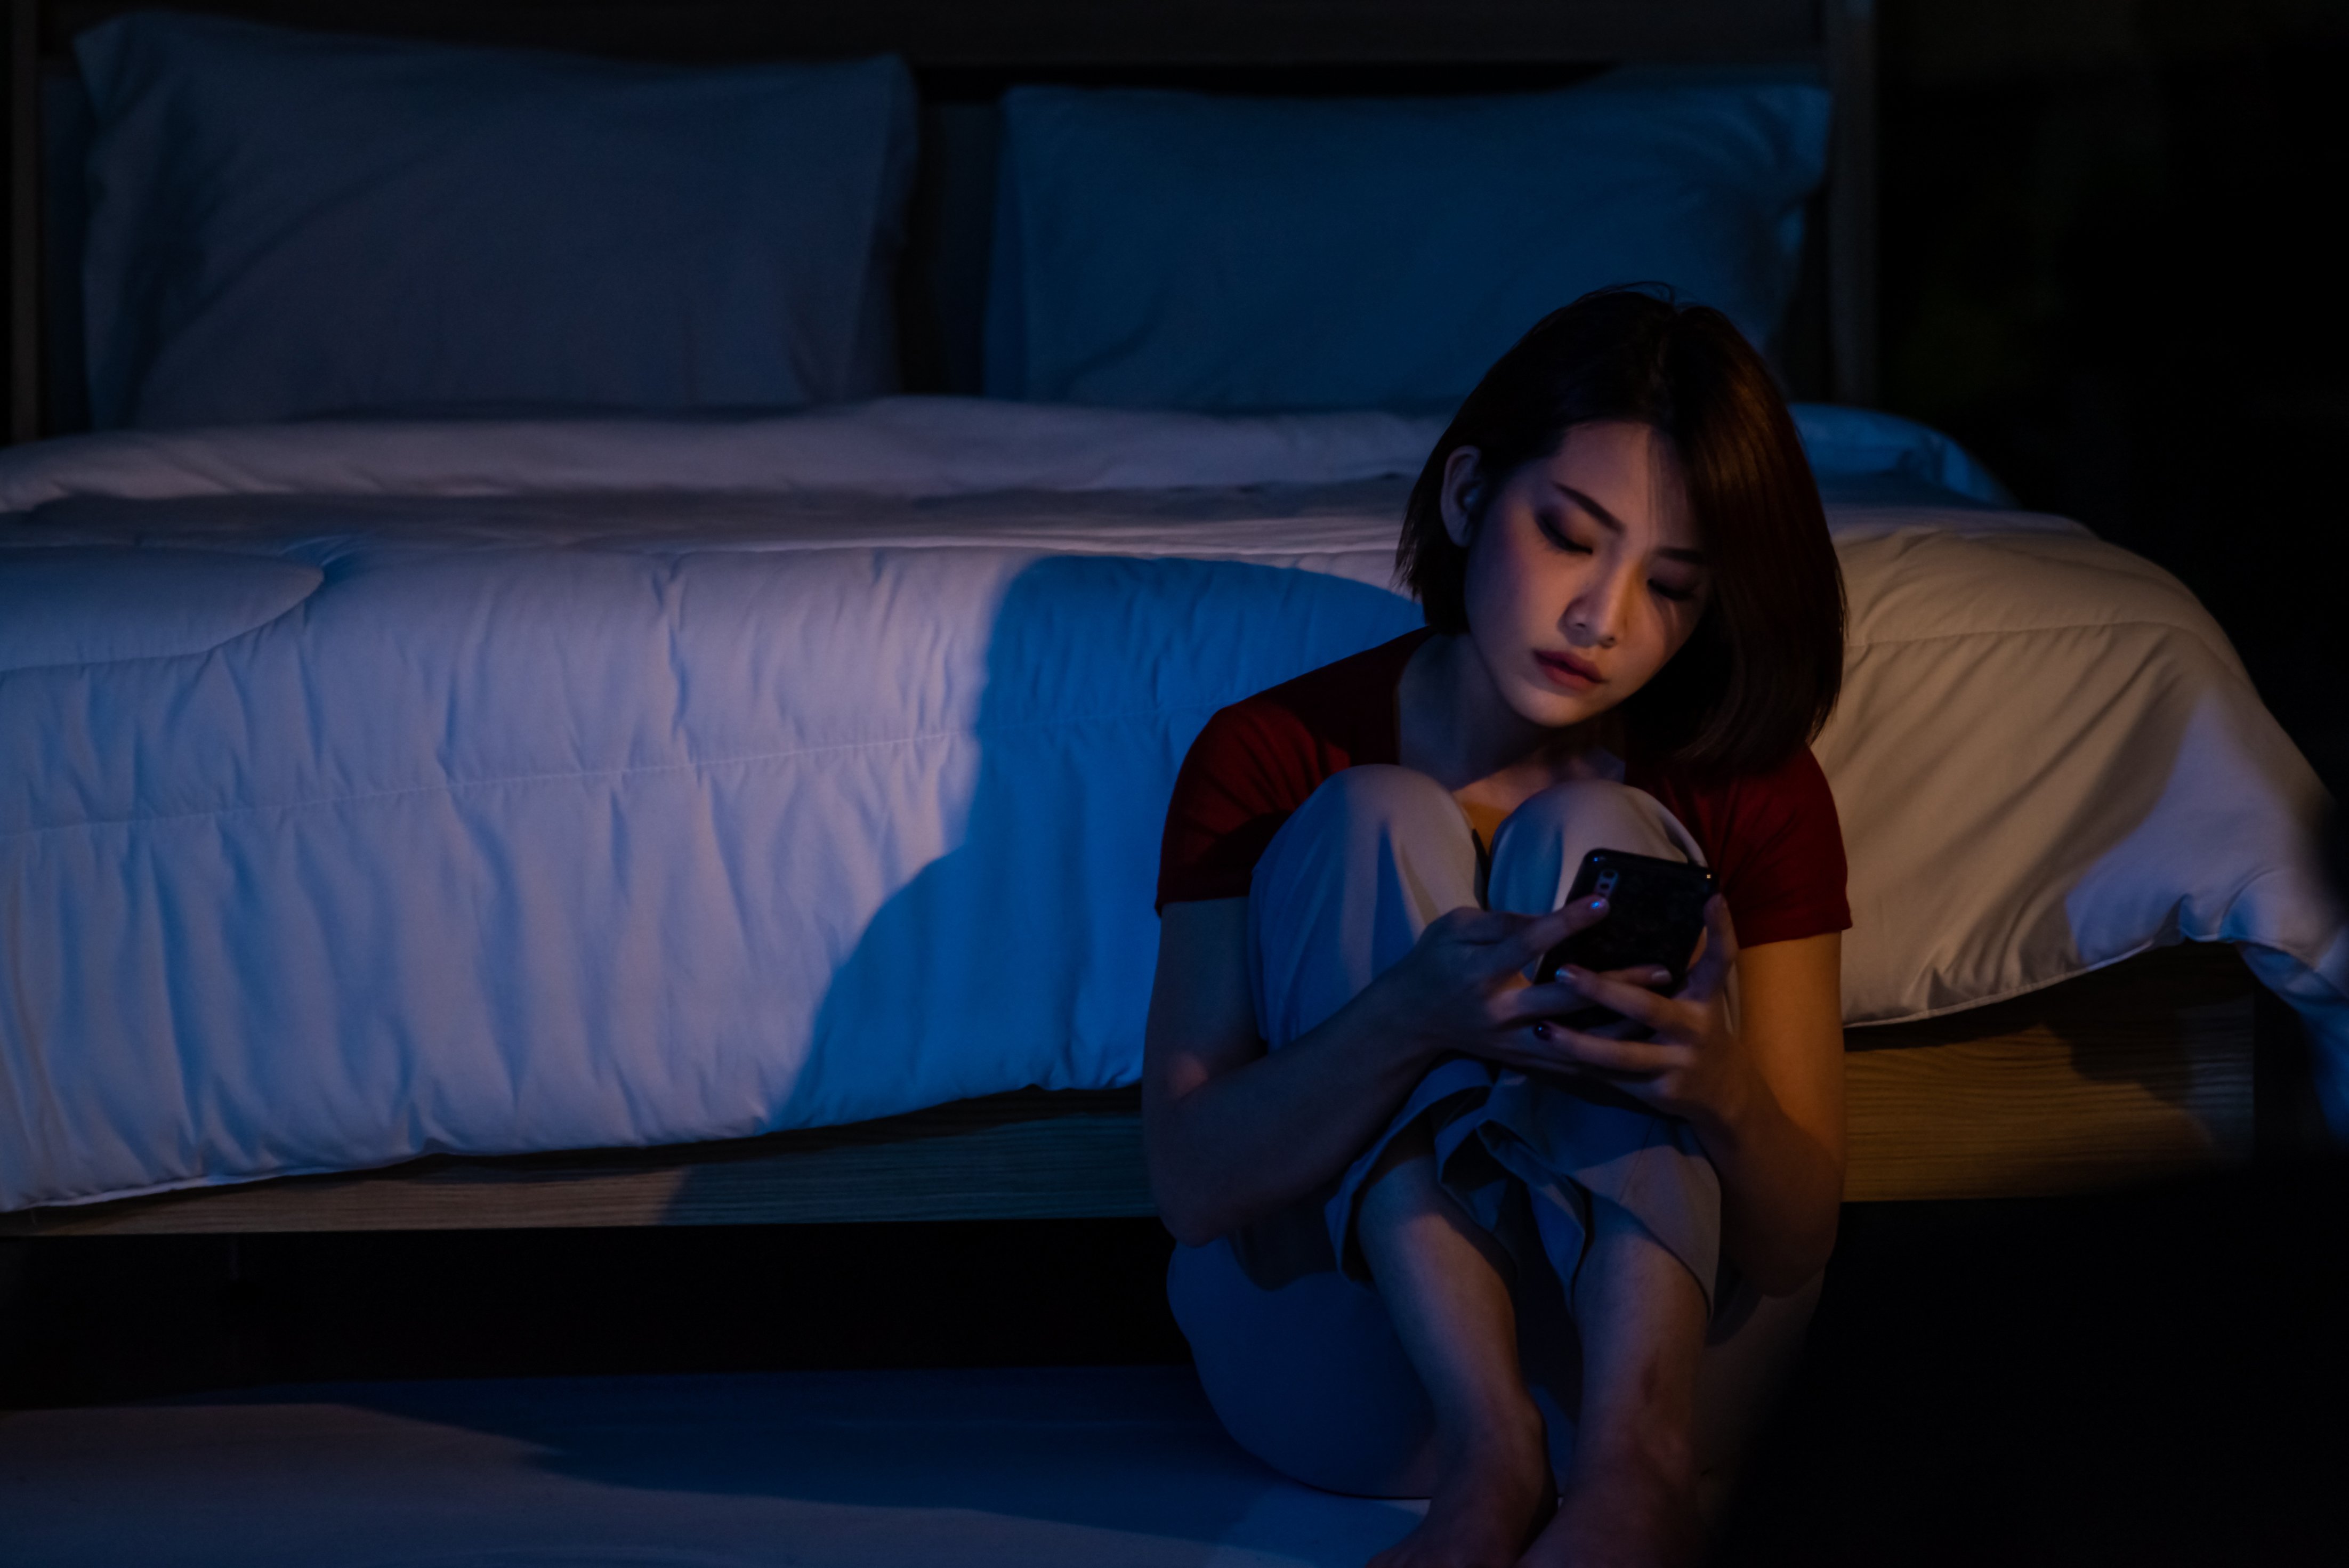 Nighttime scene of Asian woman sitting on the floor looking at her phone